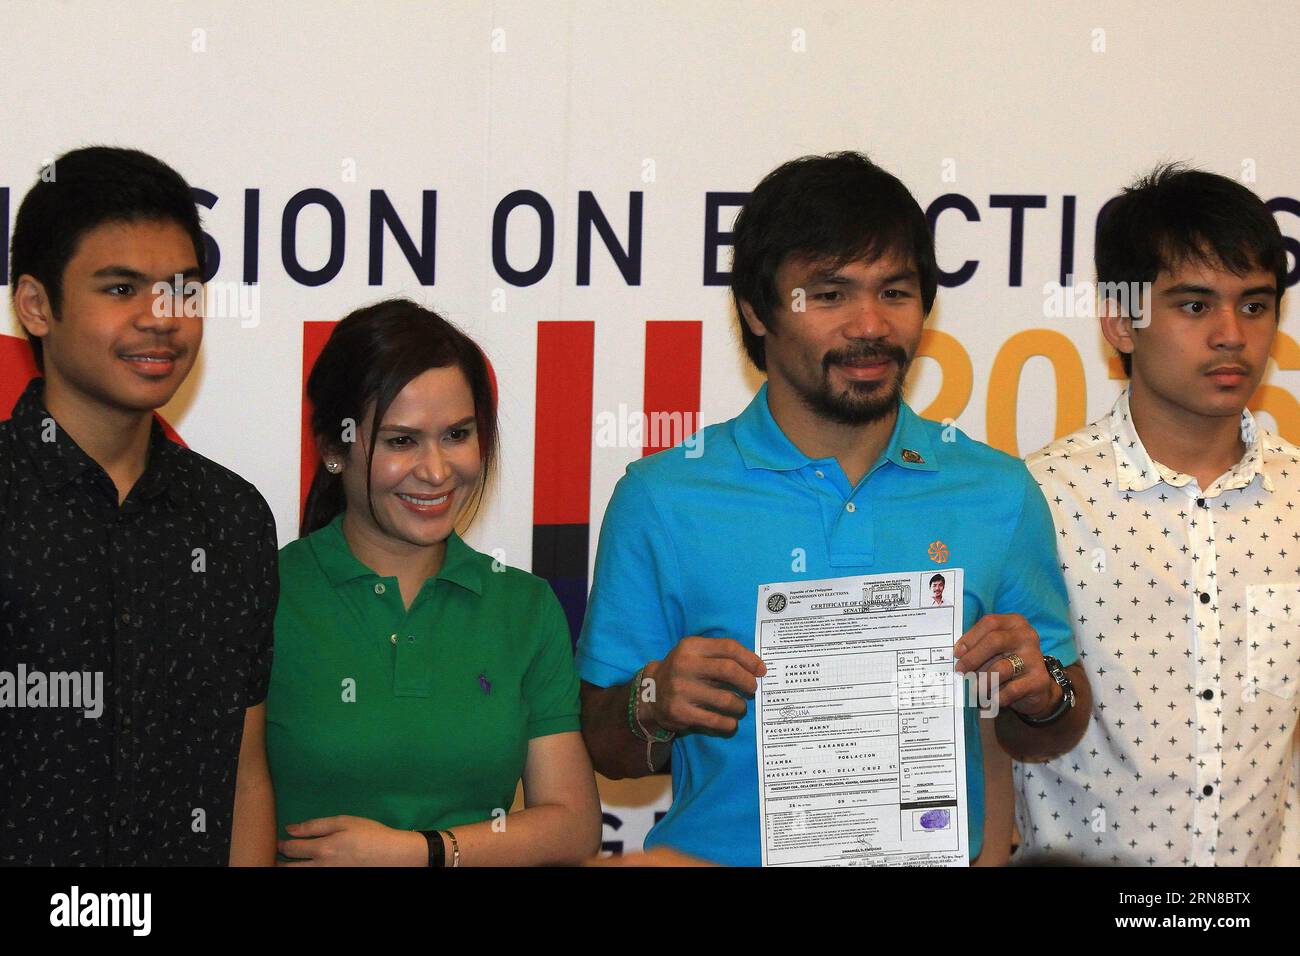 (151016) -- MANILA, Oct. 16, 2015 -- Philippine boxer Manny Pacquiao(2nd R) poses with his wife Jinkee (2nd L) and children at the Commission on Elections building in Manila, the Philippines, Oct. 16, 2015. The Philippines election season kicked off Oct. 12 and Pacquiao is one of the most popular senatorial candidates.) PHILIPPINES-MANILA-BOXING CHAMPION-SENATOR RouellexUmali PUBLICATIONxNOTxINxCHN   Manila OCT 16 2015 Philippine Boxer Manny Pacquiao 2nd r Poses With His wife  2nd l and Children AT The Commission ON Elections Building in Manila The Philippines OCT 16 2015 The Philippines ELECT Stock Photo